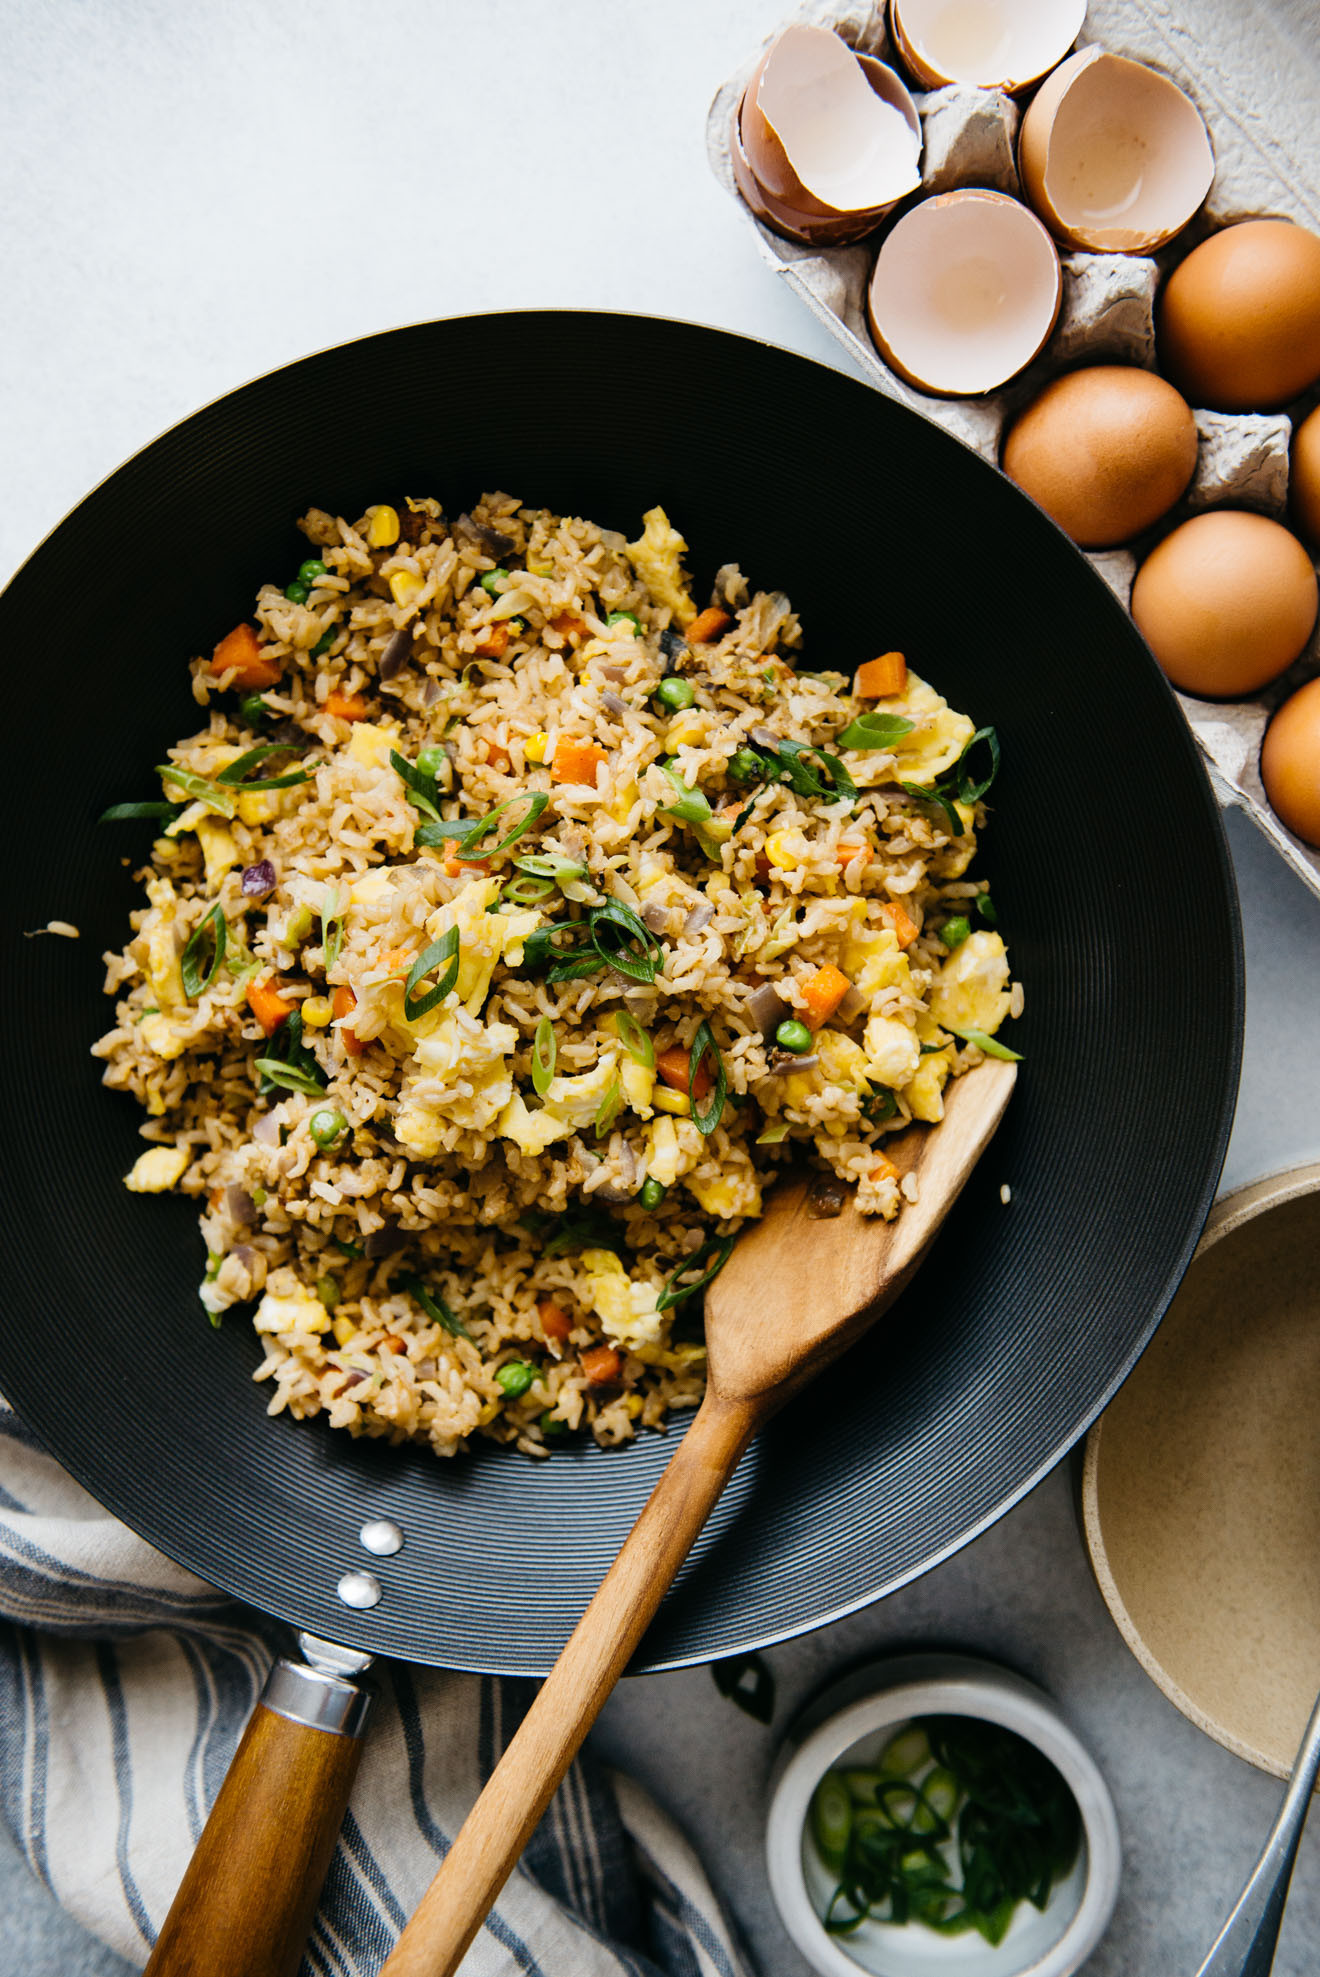 Egg Fried Rice Recipes
 The Easiest Egg Fried Rice 15 Minutes